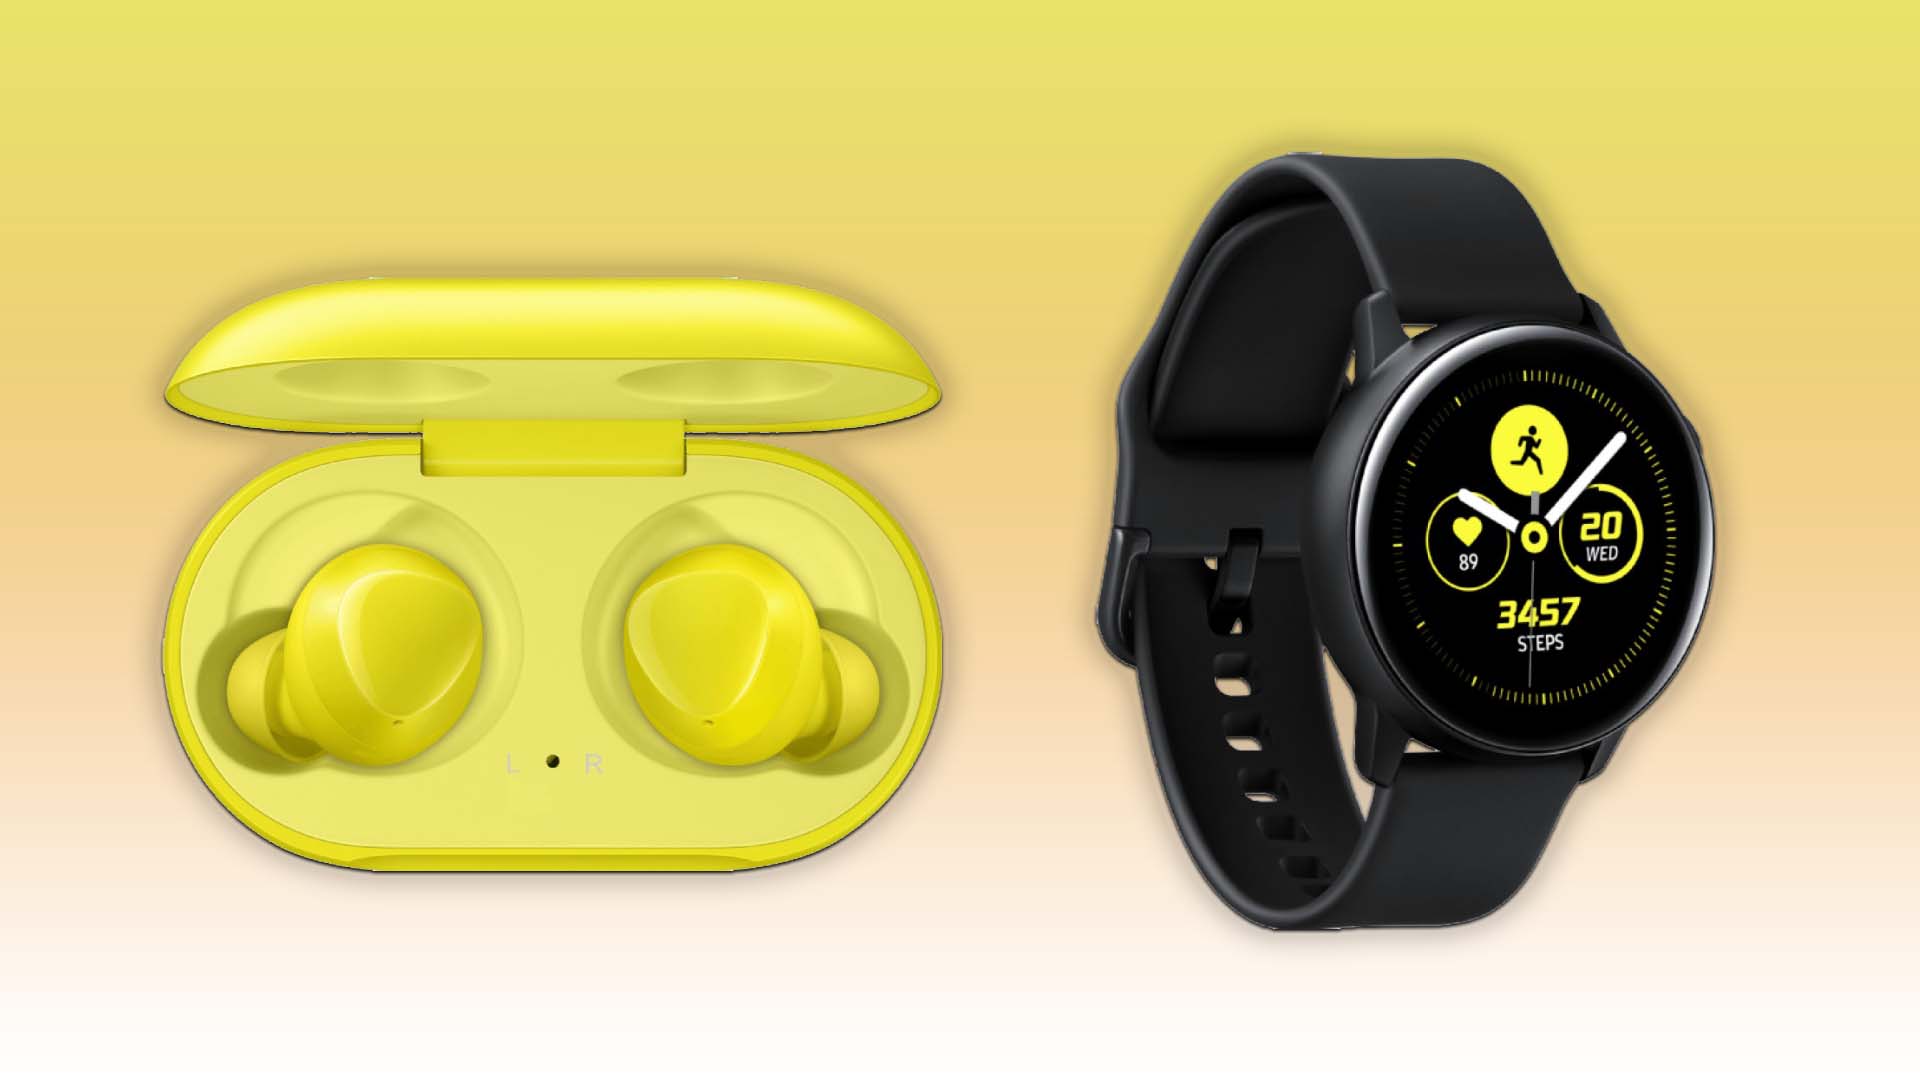 The Samsung Galaxy Watch Active and Galaxy Buds Bunch of images